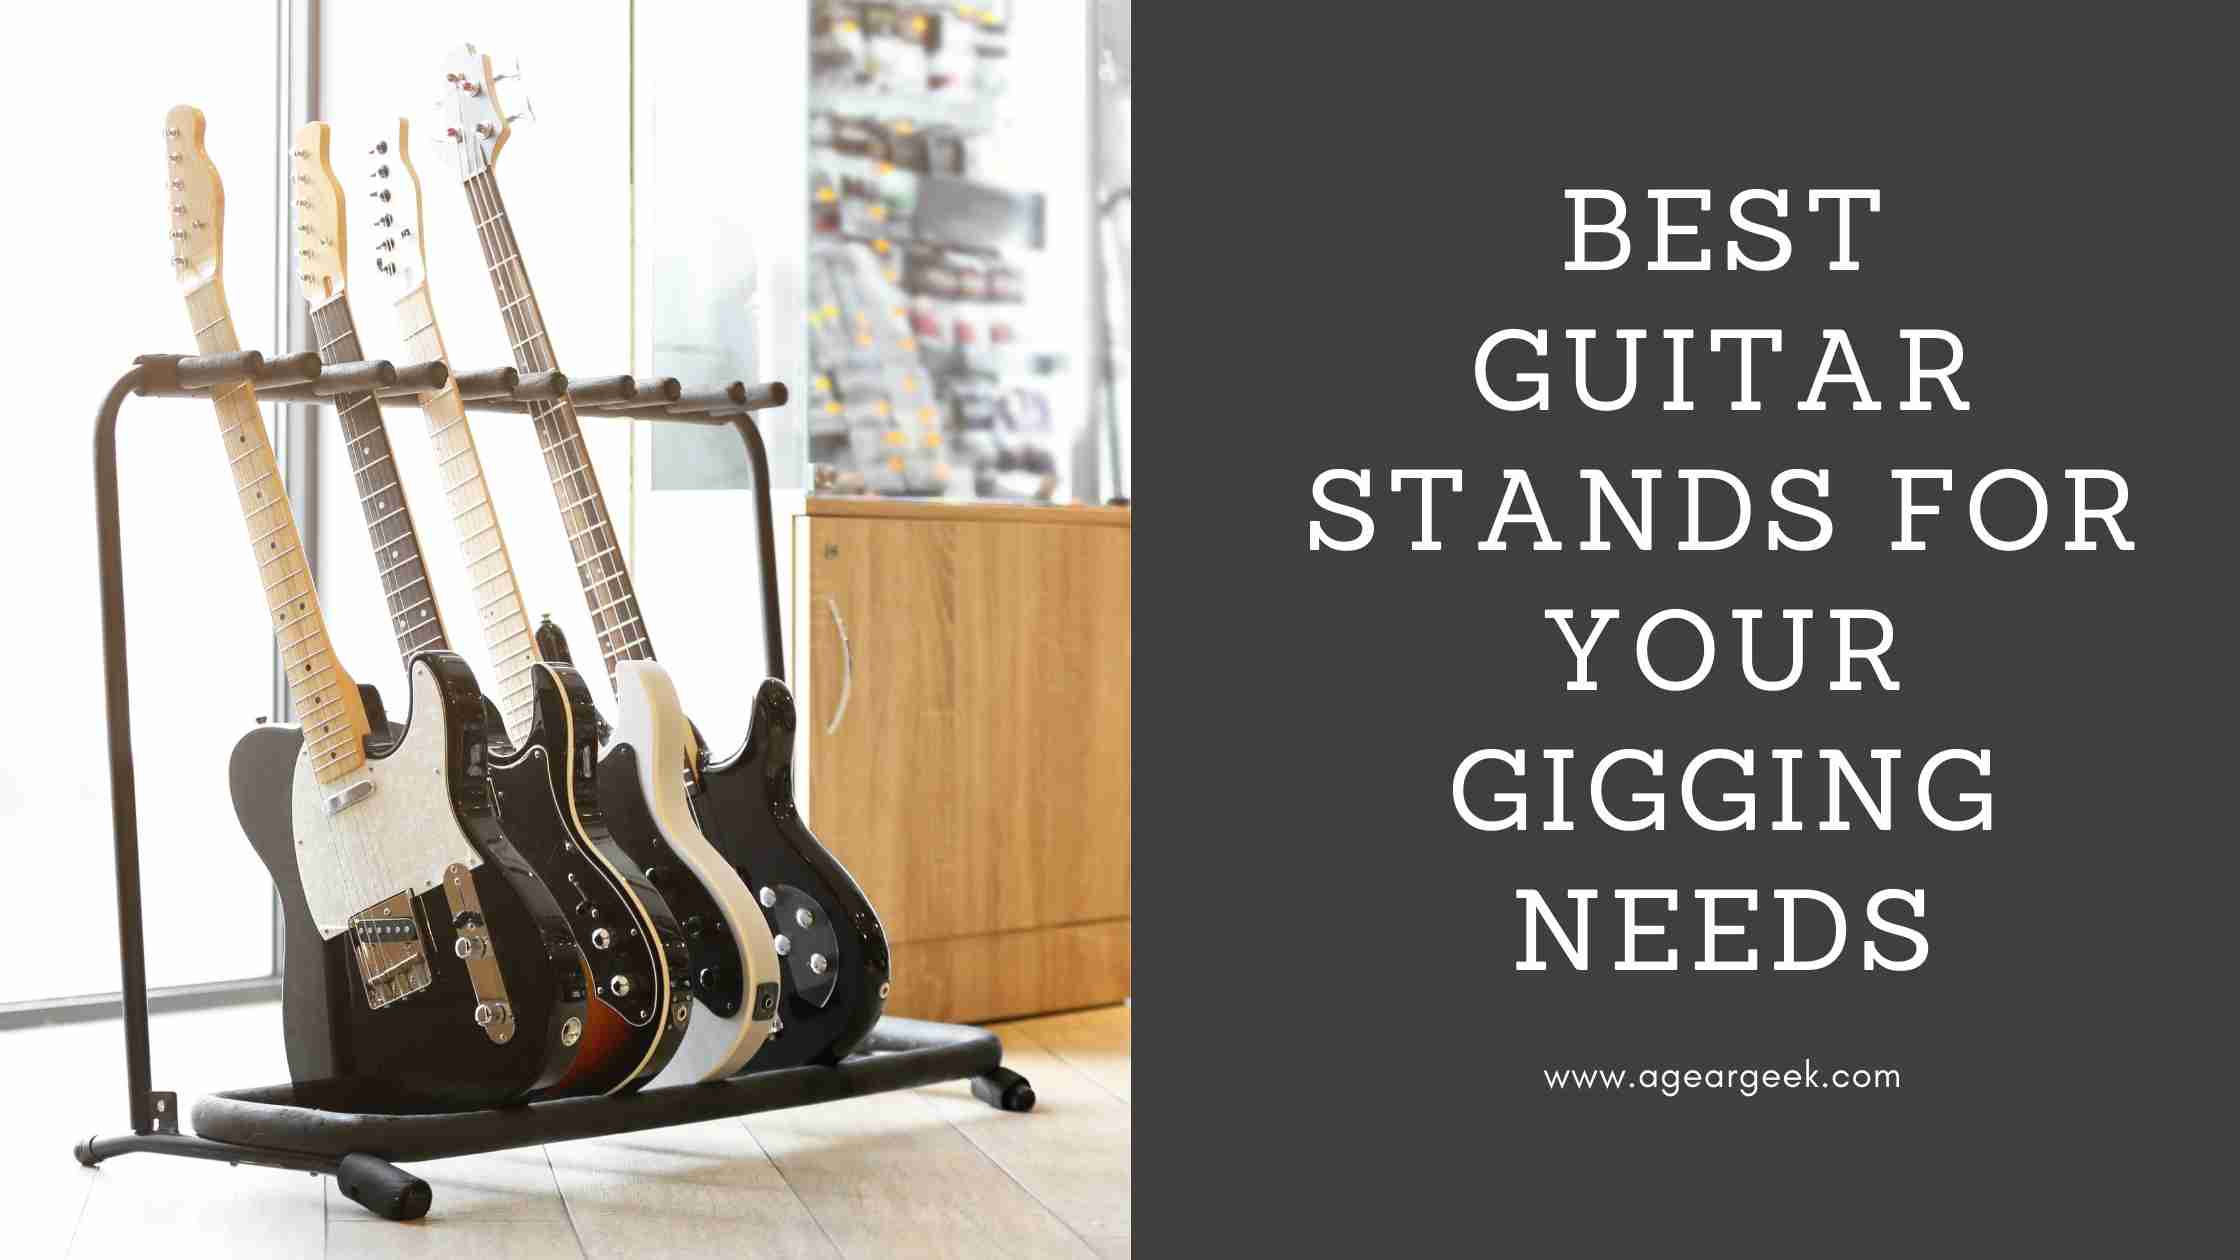 You are currently viewing Best Guitar Stands for your gigging needs